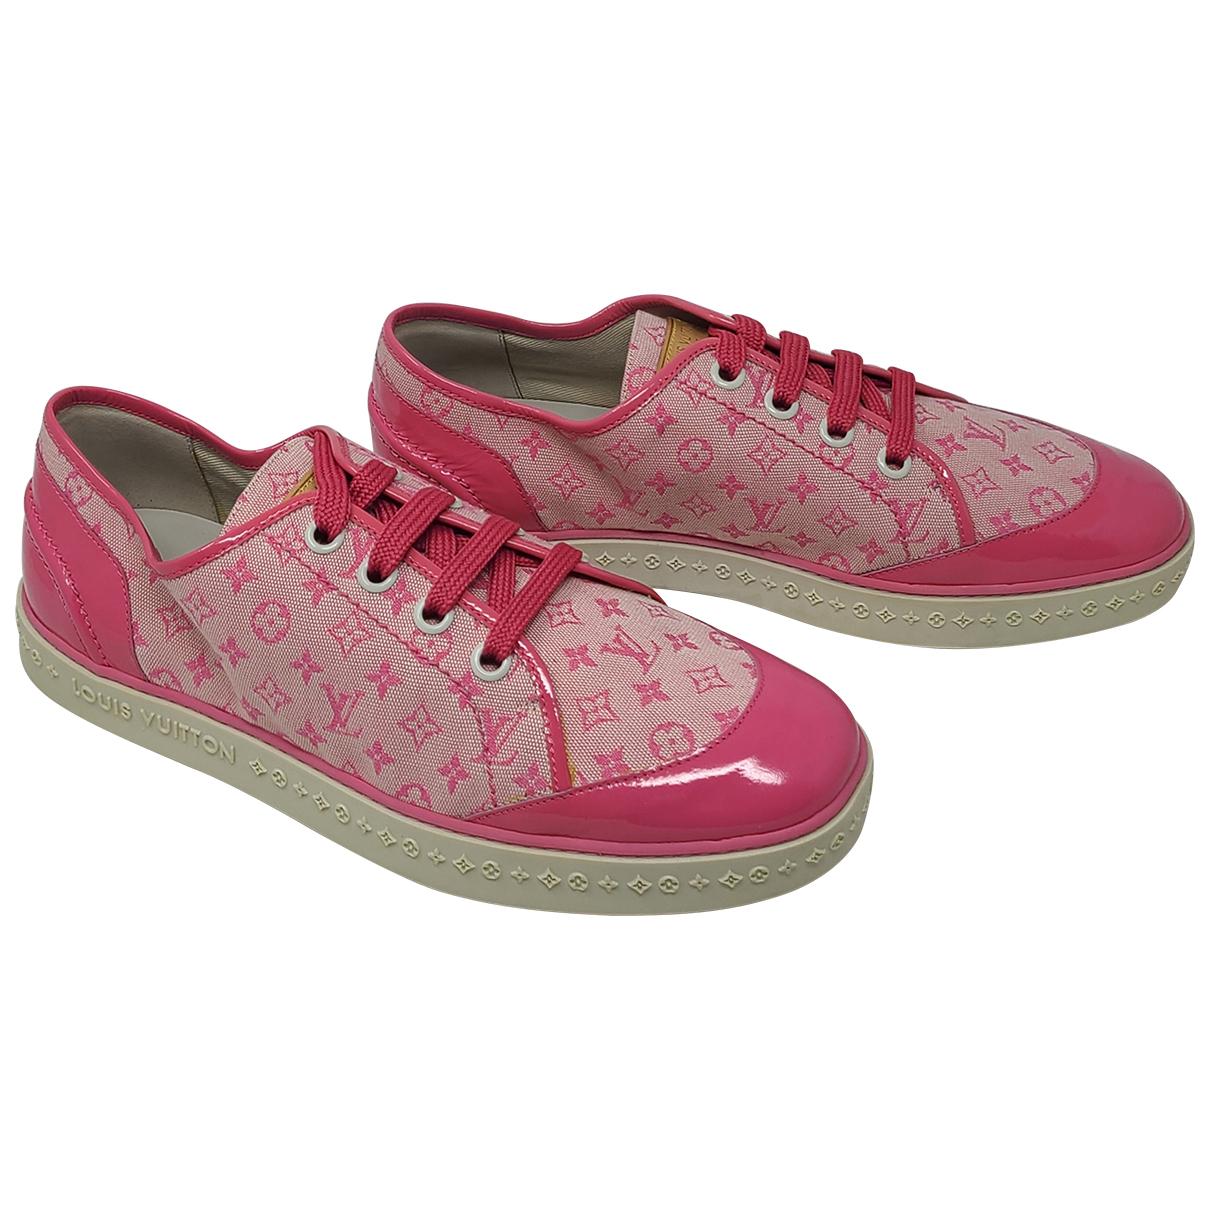 Louis-Vuitton Paris sneakers women Size 38 /US 7 Pink Made In Italy BA 1013